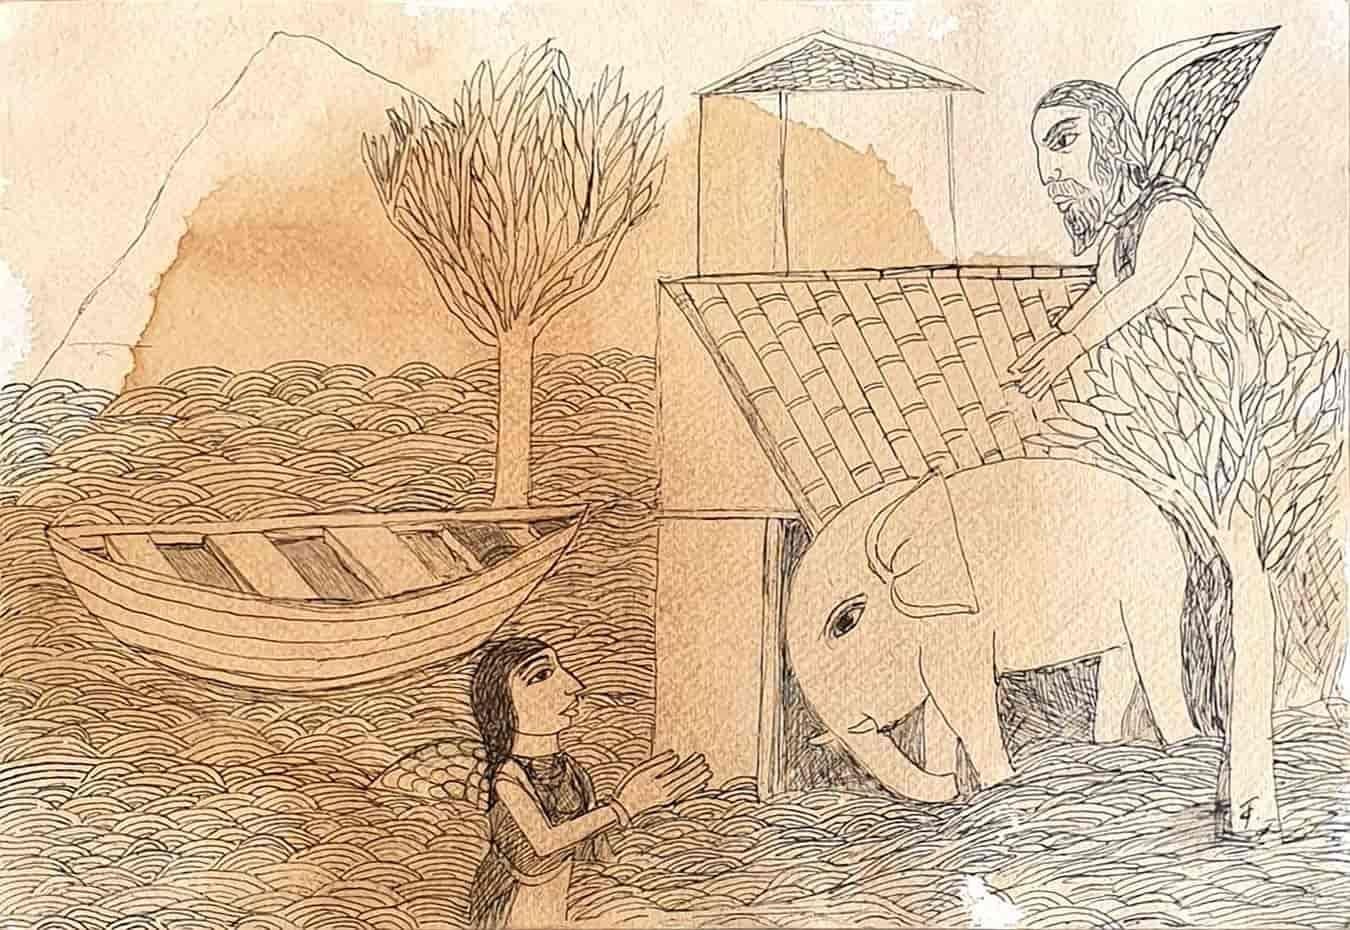 Welcoming the Young Elephant, Ink, Tea Stain on paper by Indian Artist"In Stock"